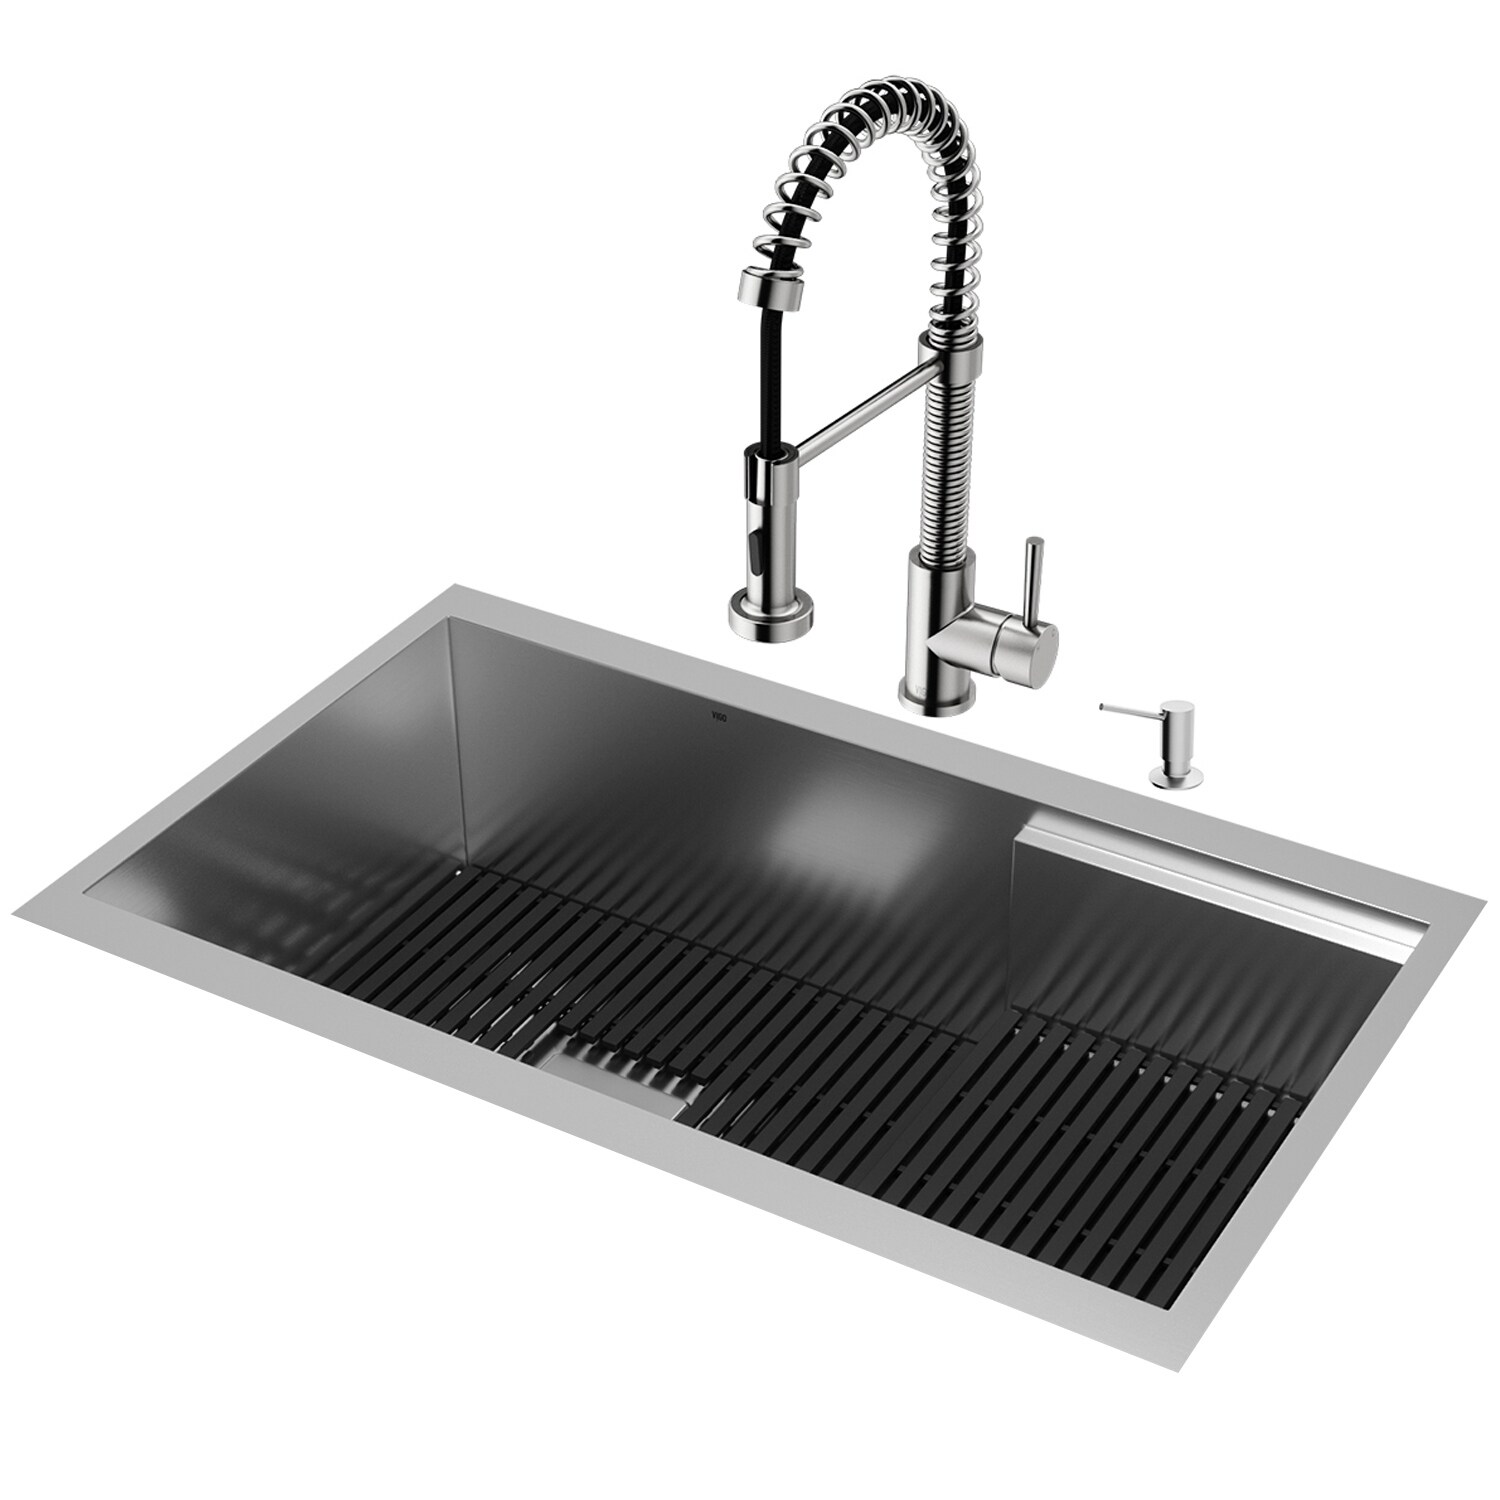 VIGO Hampton 32 in. Stainess Steel Kitchen Sink with Edison Faucet and Soap Dispenser